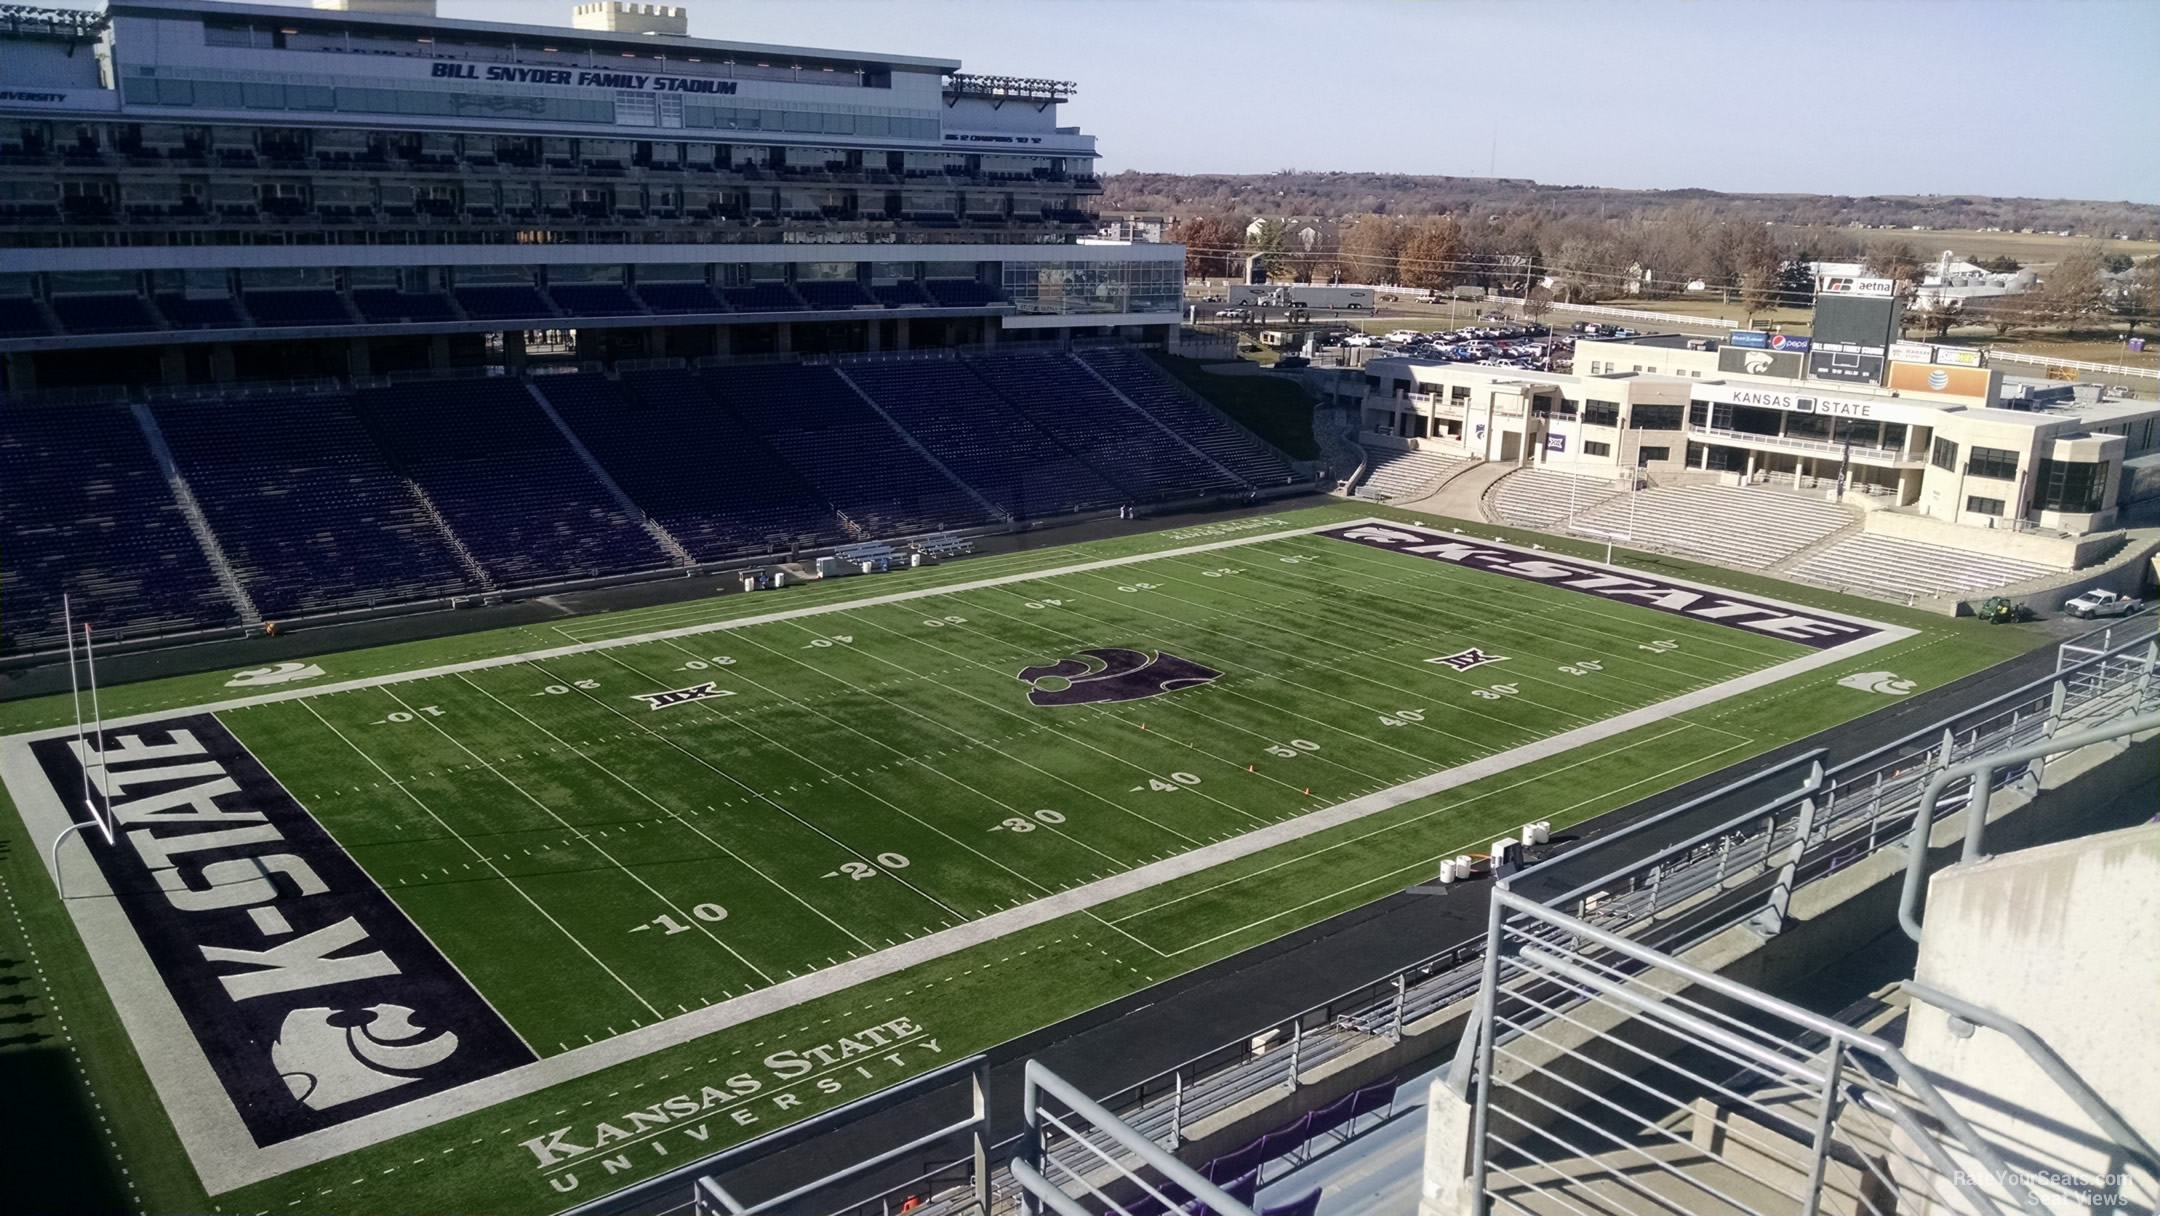 section 420, row 10 seat view  - bill snyder family stadium